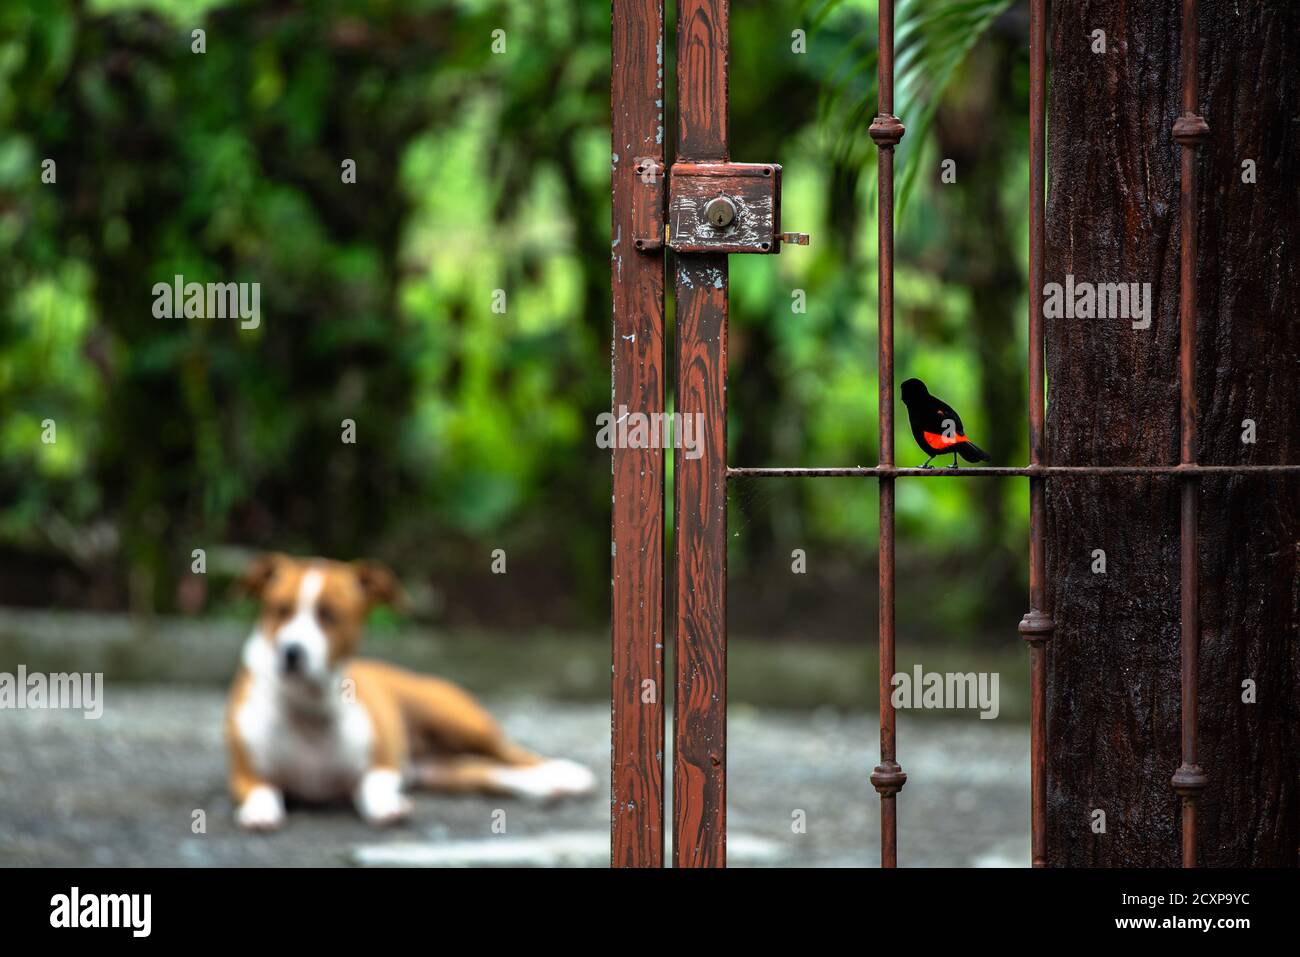 Cheeky bird, funny Cherrie's tanager provokes guarding dog sitting on rusty iron gate, Ramphocelus passerinii costaricensis, scarlet rumped tanager Stock Photo